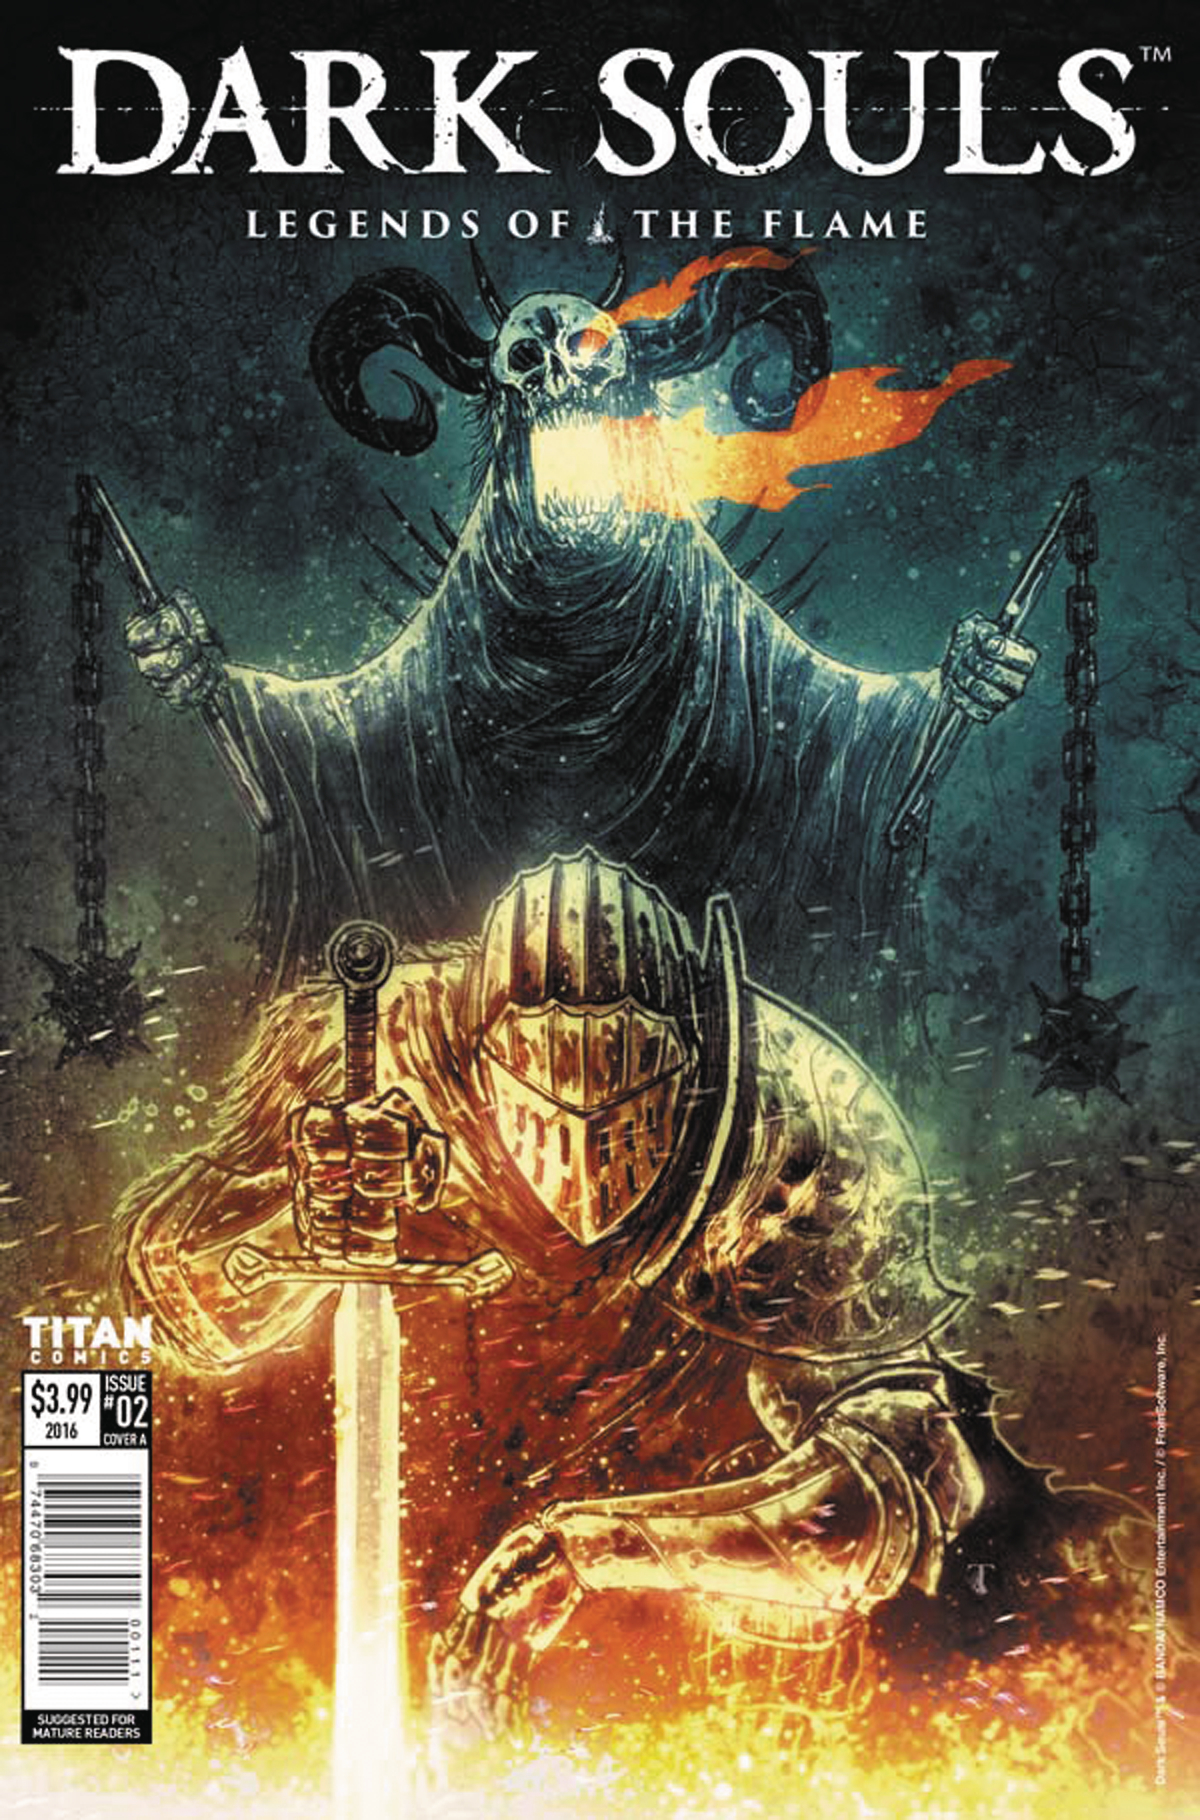 DARK SOULS LEGENDS OF THE FLAME #2 (OF 2) CVR A TEMPLESMITH